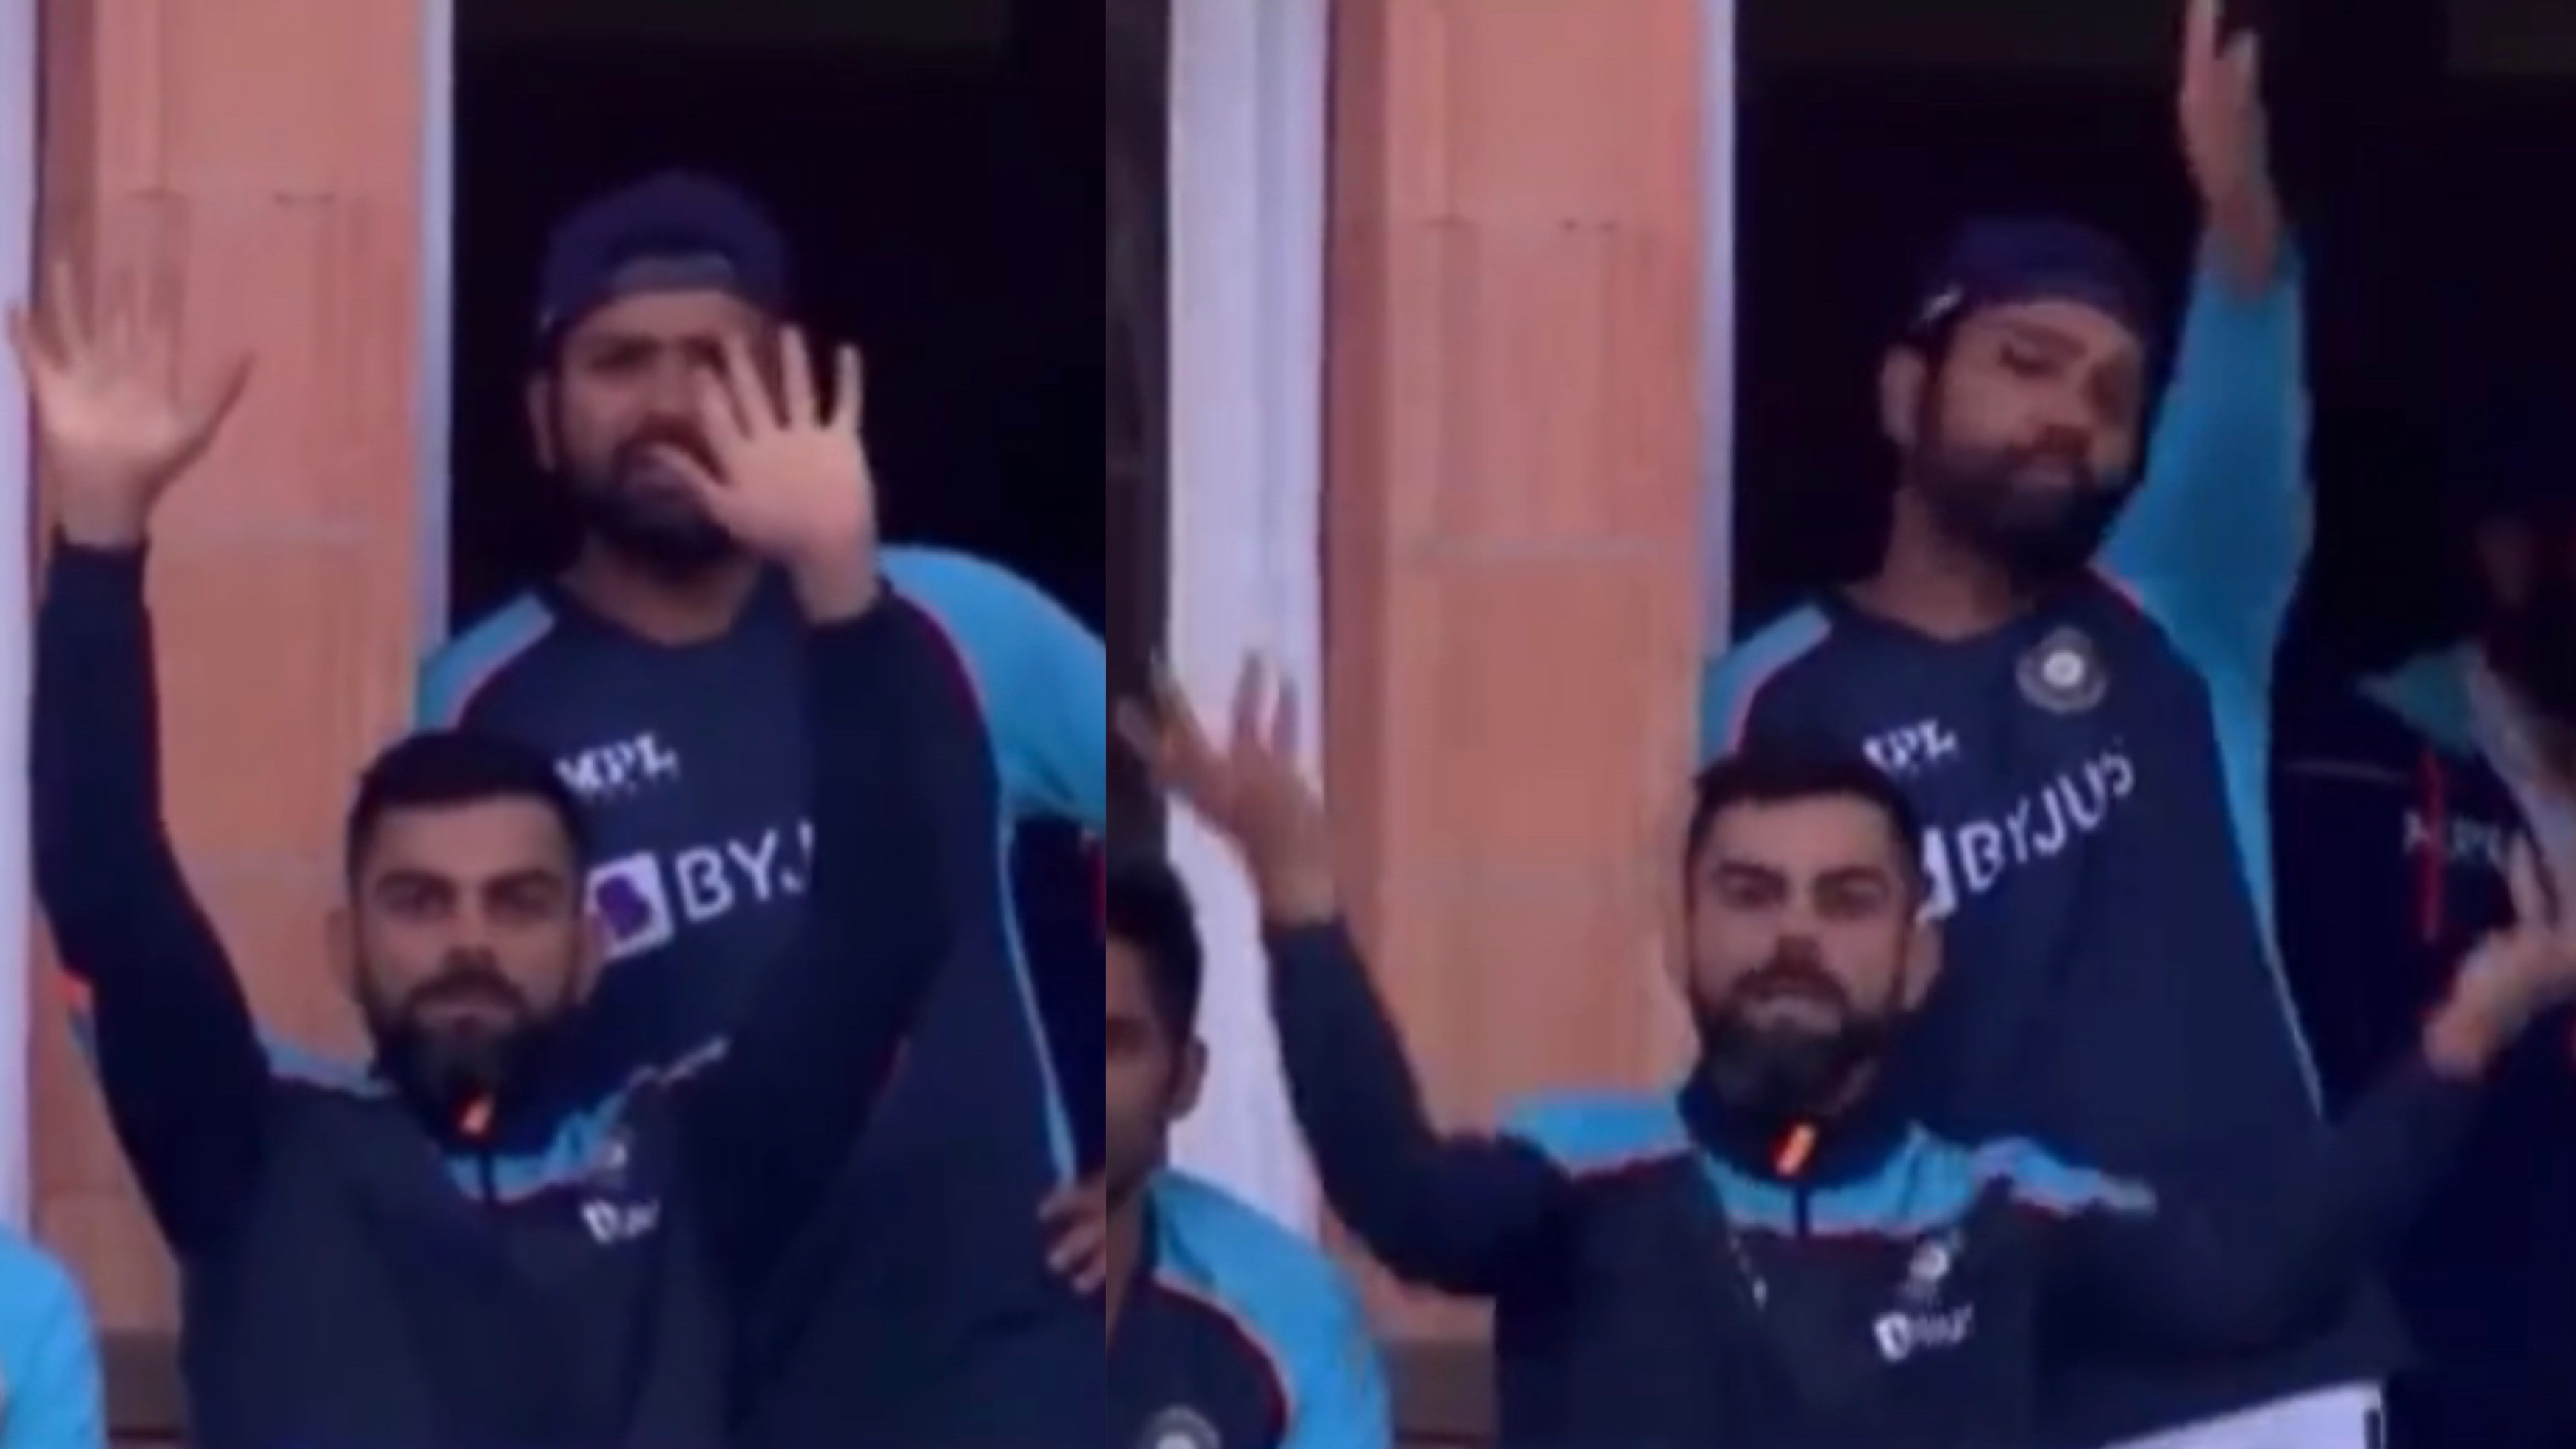 ENG v IND 2021: WATCH - Virat Kohli, Rohit Sharma get agitated about the light situation at Lord's